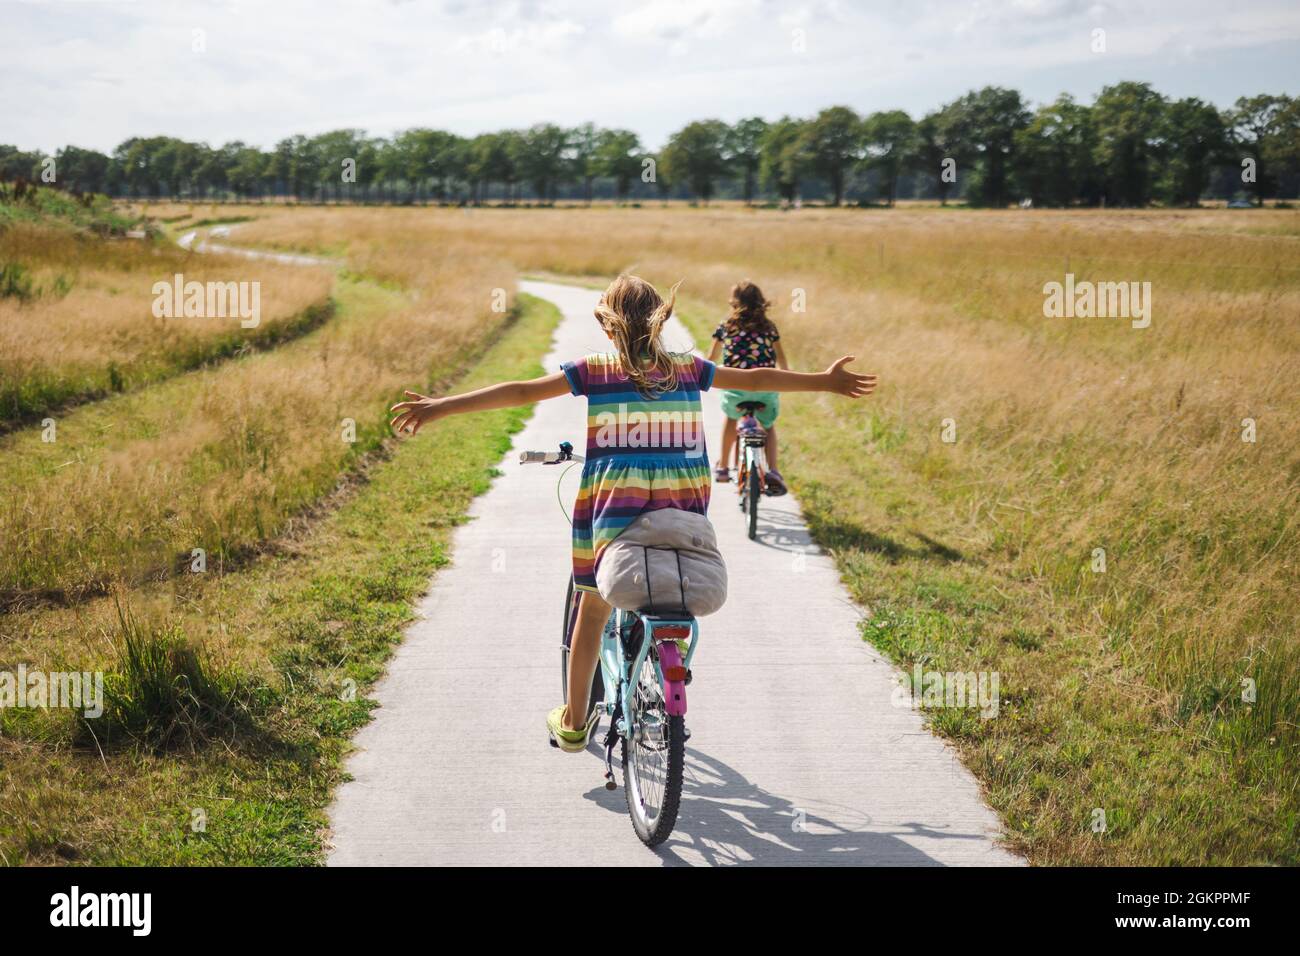 Little girl riding a bicycle with her arms outstretched Stock Photo